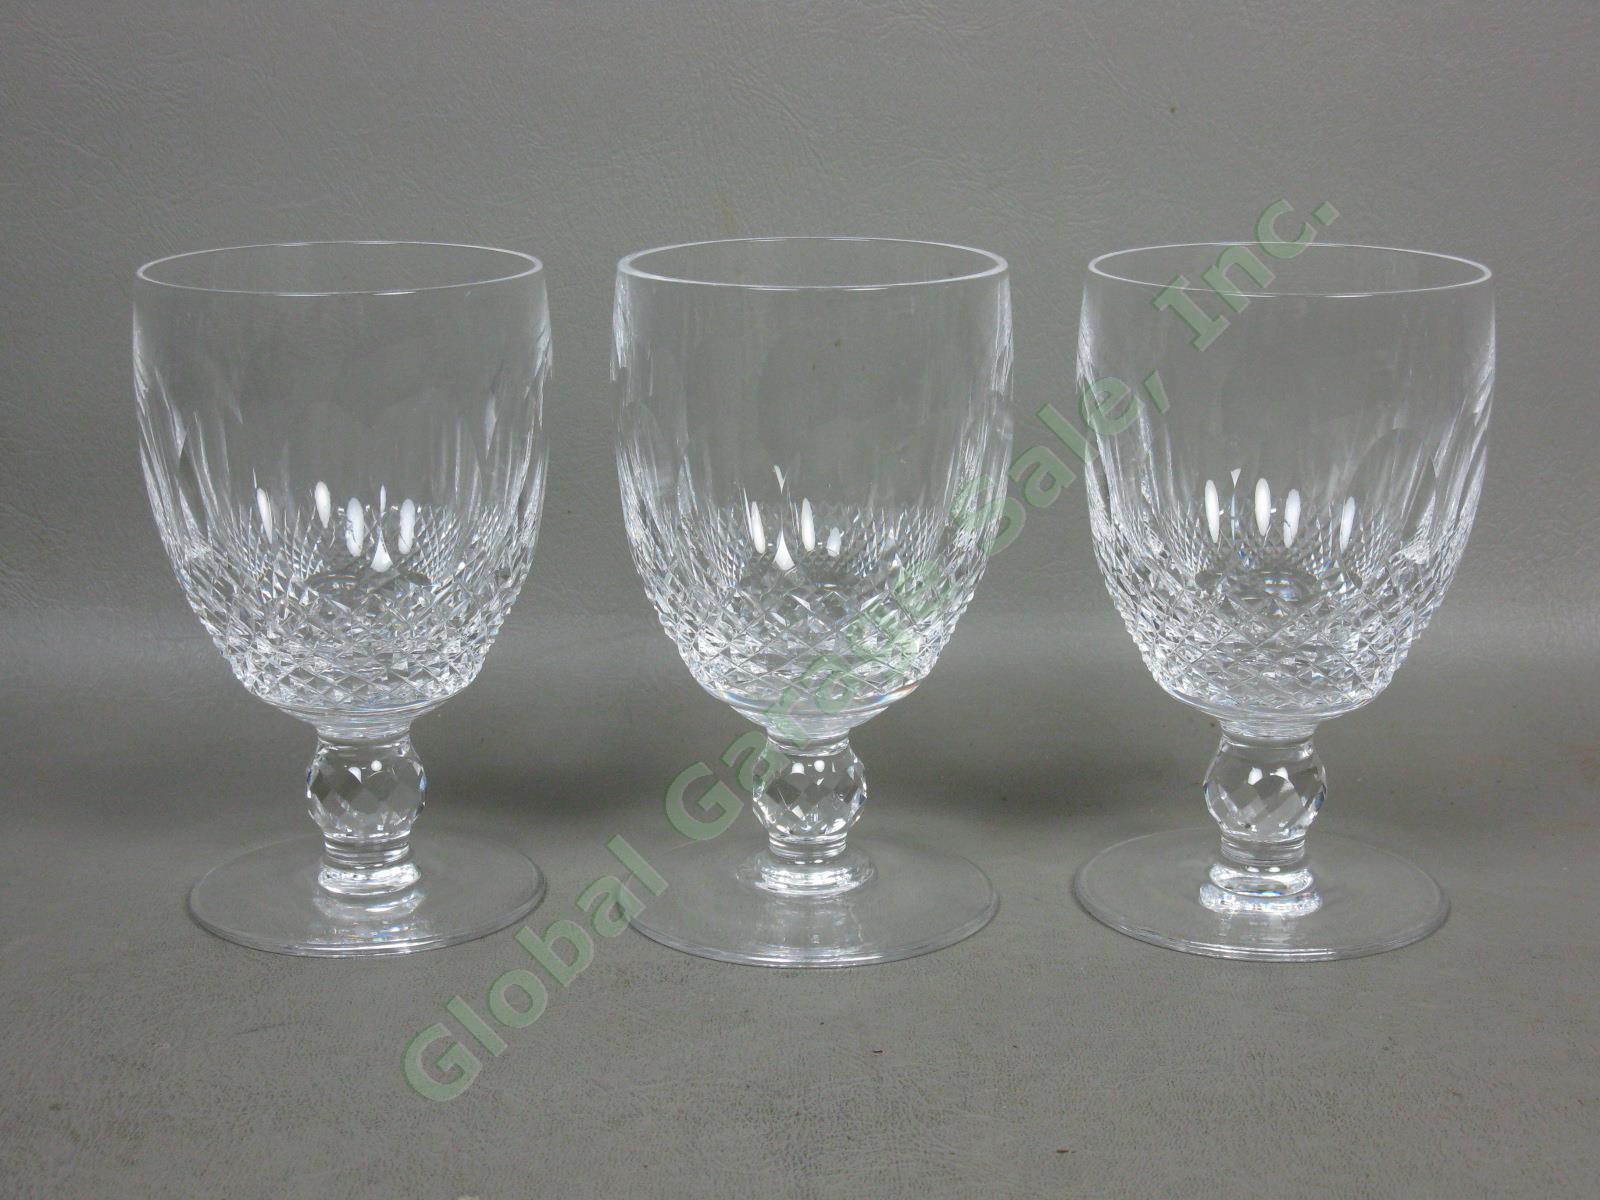 3 Waterford Cut Lead Crystal Colleen Water Goblet Glasses Set Lot 5-1/4" Tall NR